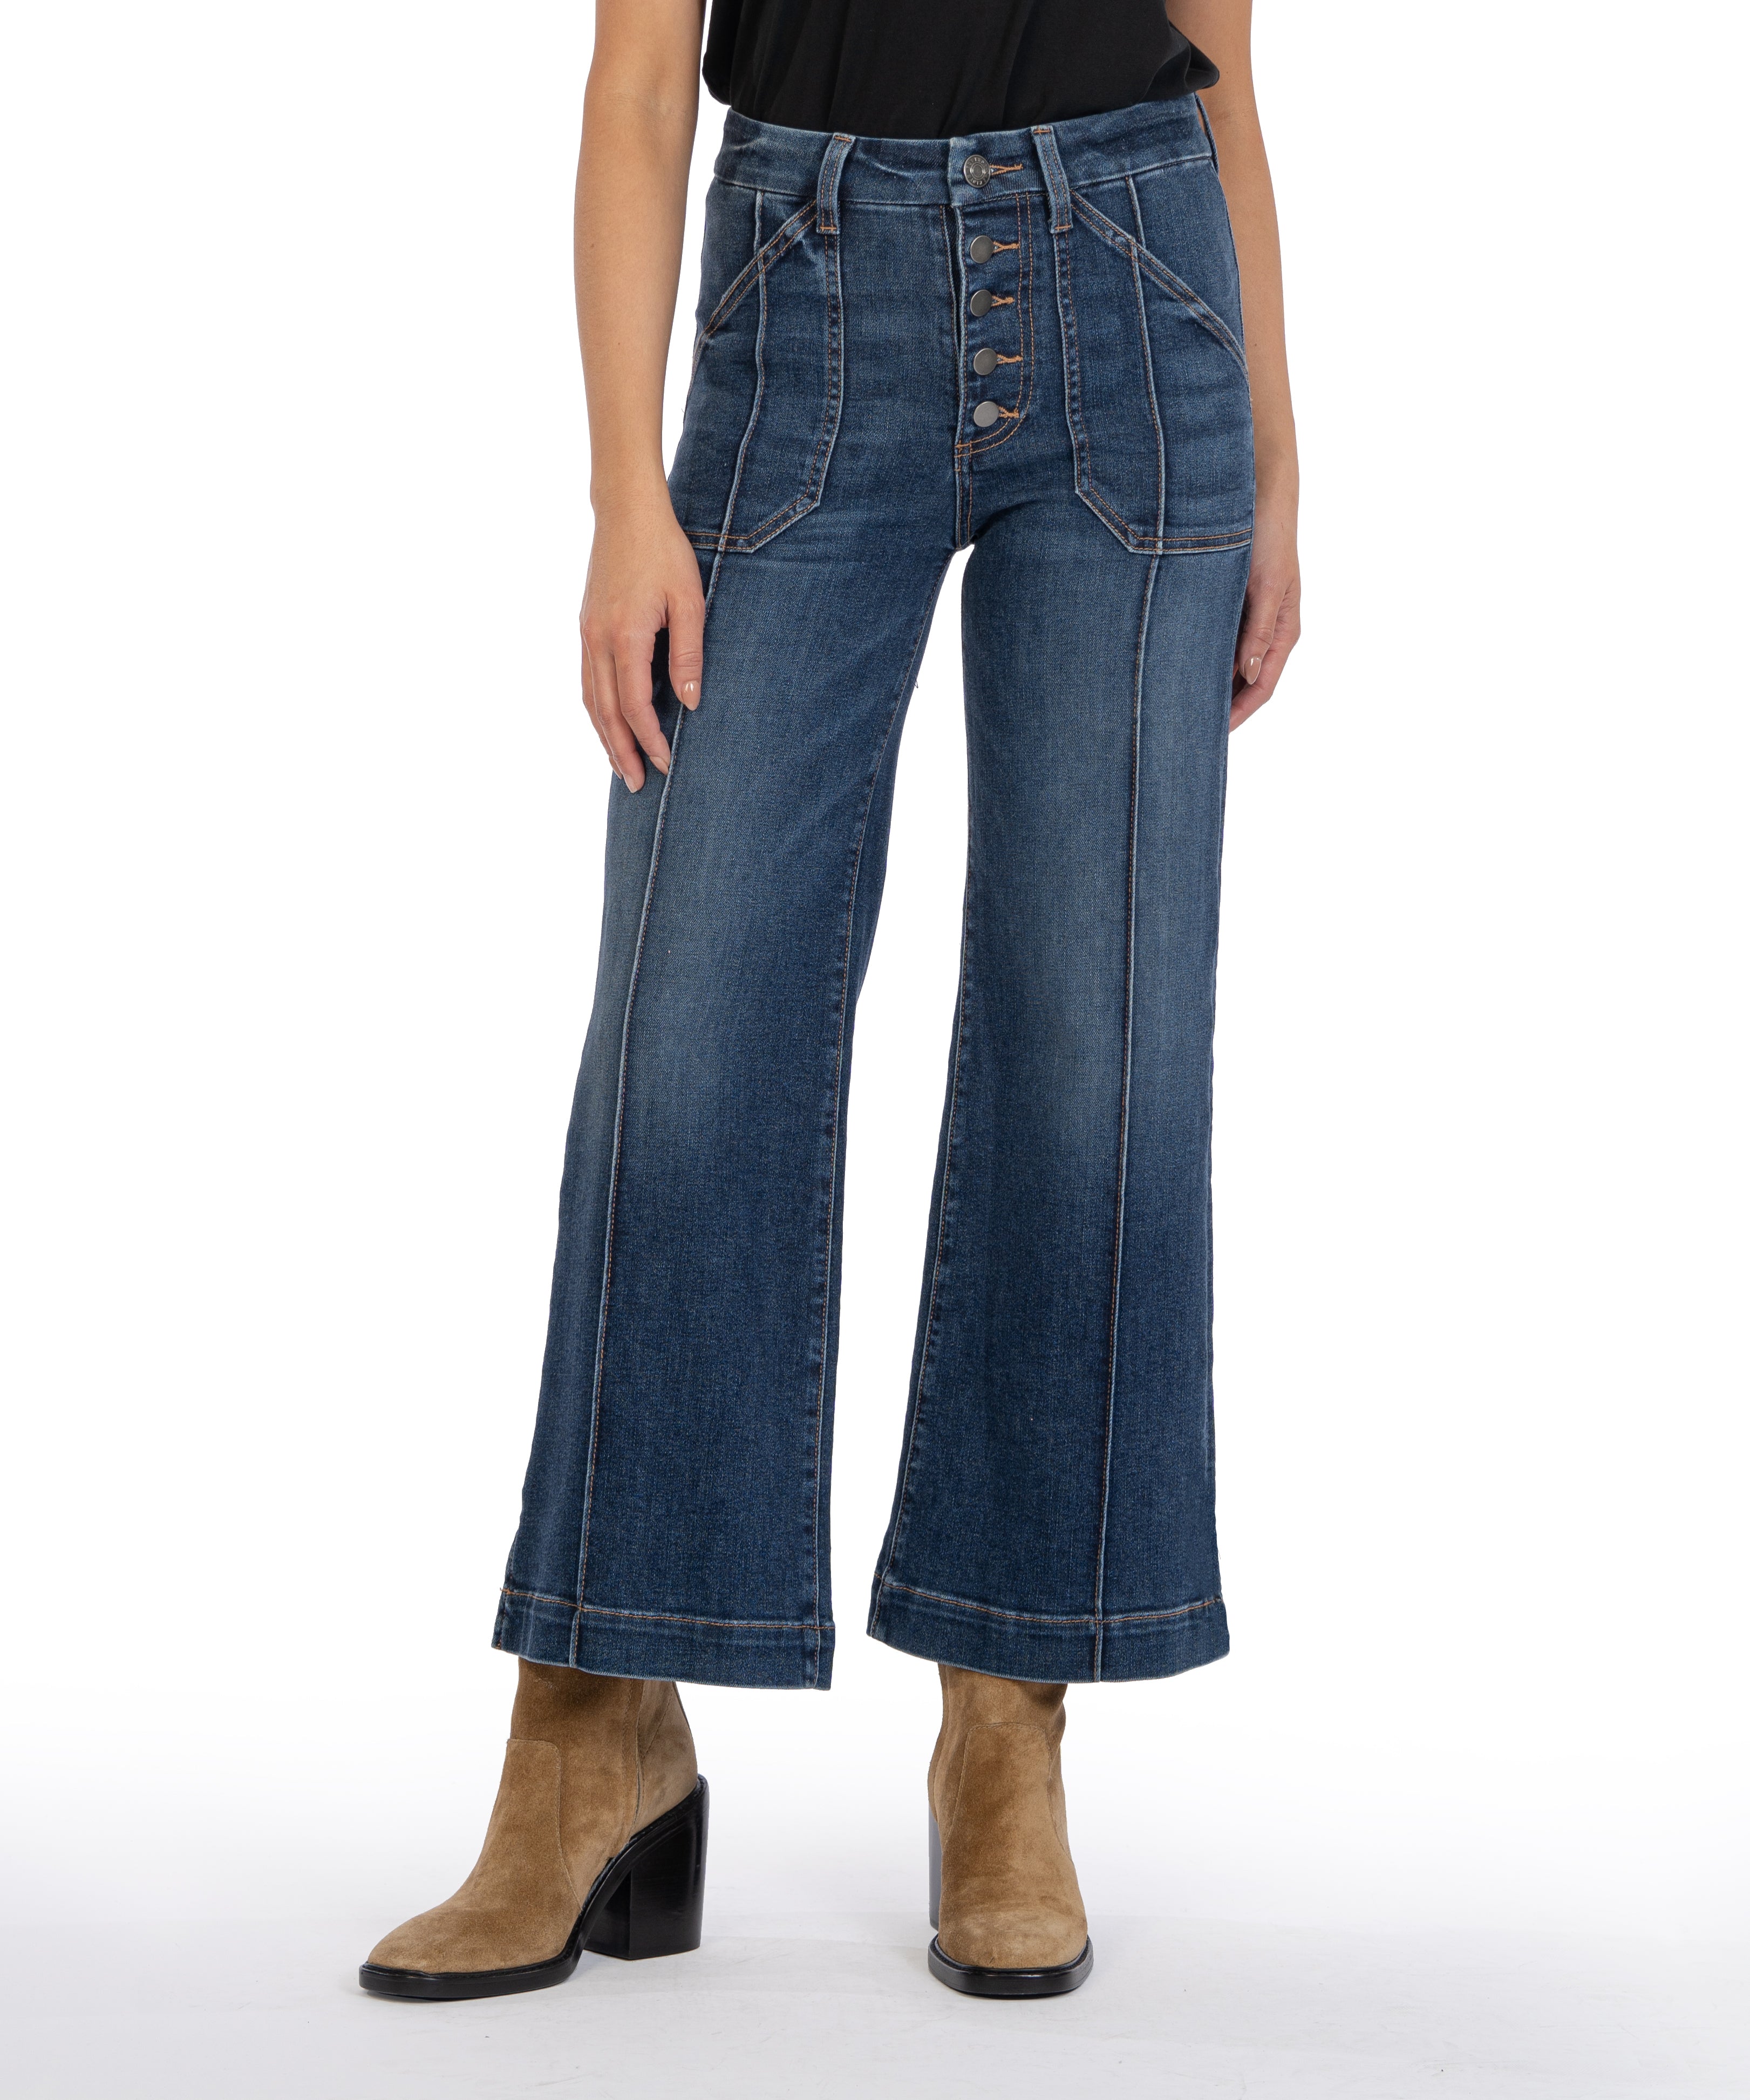 Meg High Waist Ankle Wide Leg Jeans - Kut from the Kloth